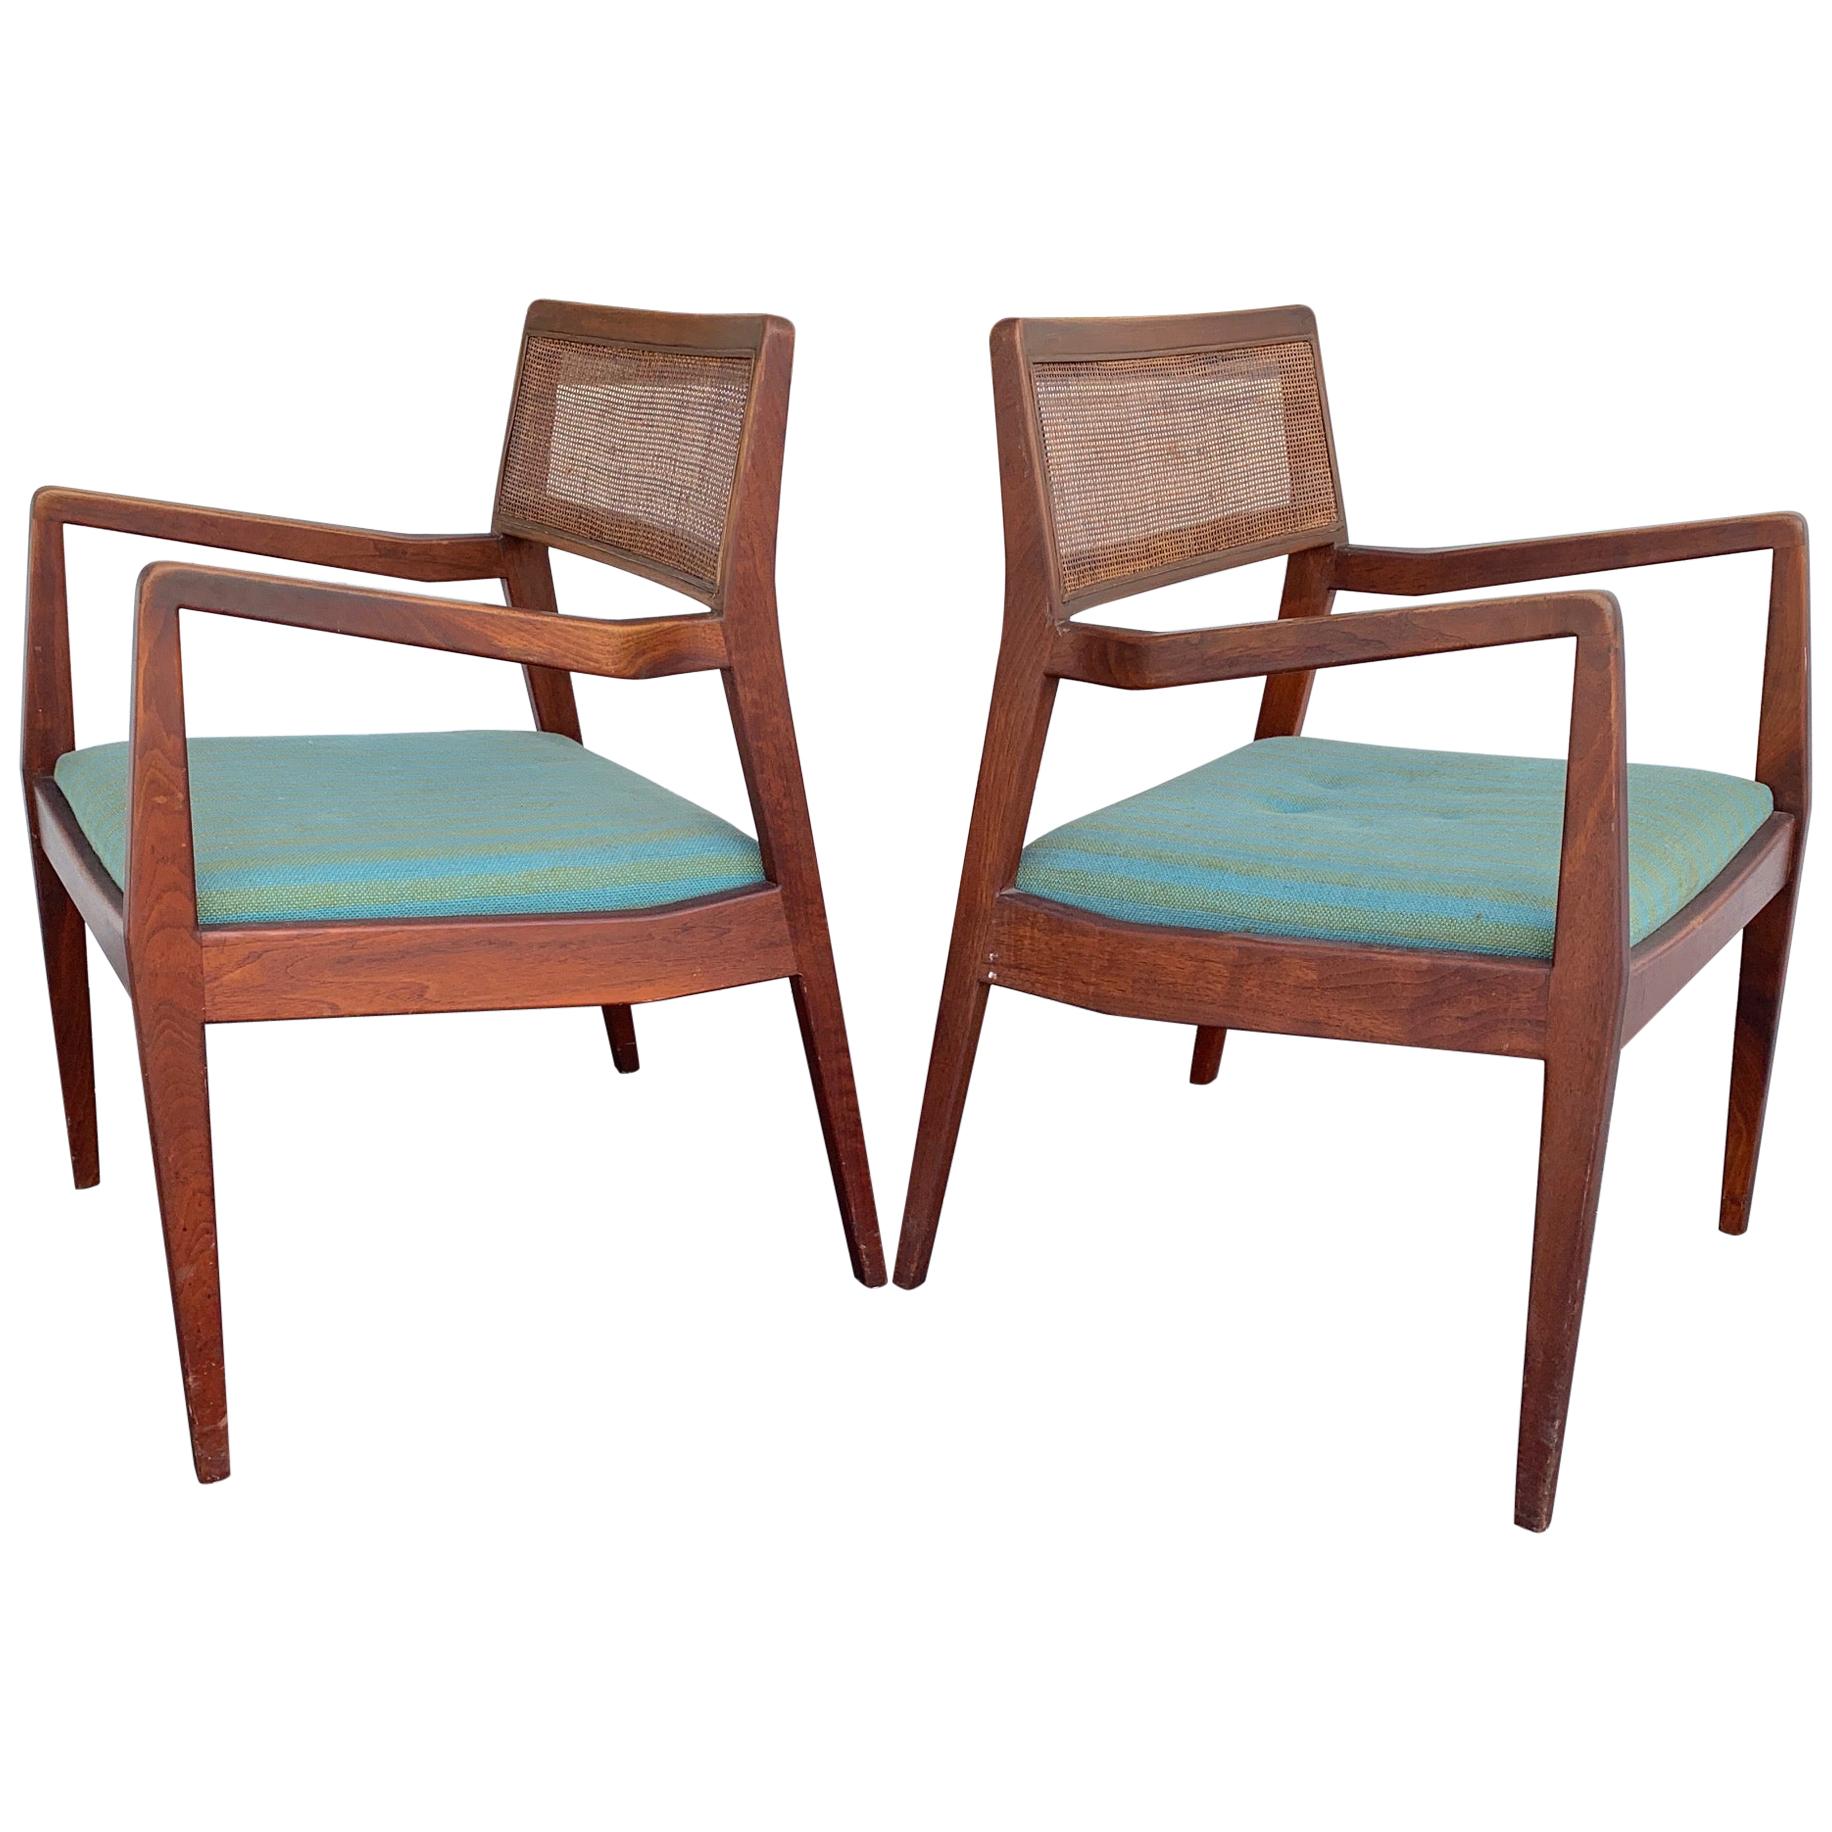 Pair of Jens Risom Classic "Playboy" Chairs, circa 1960s